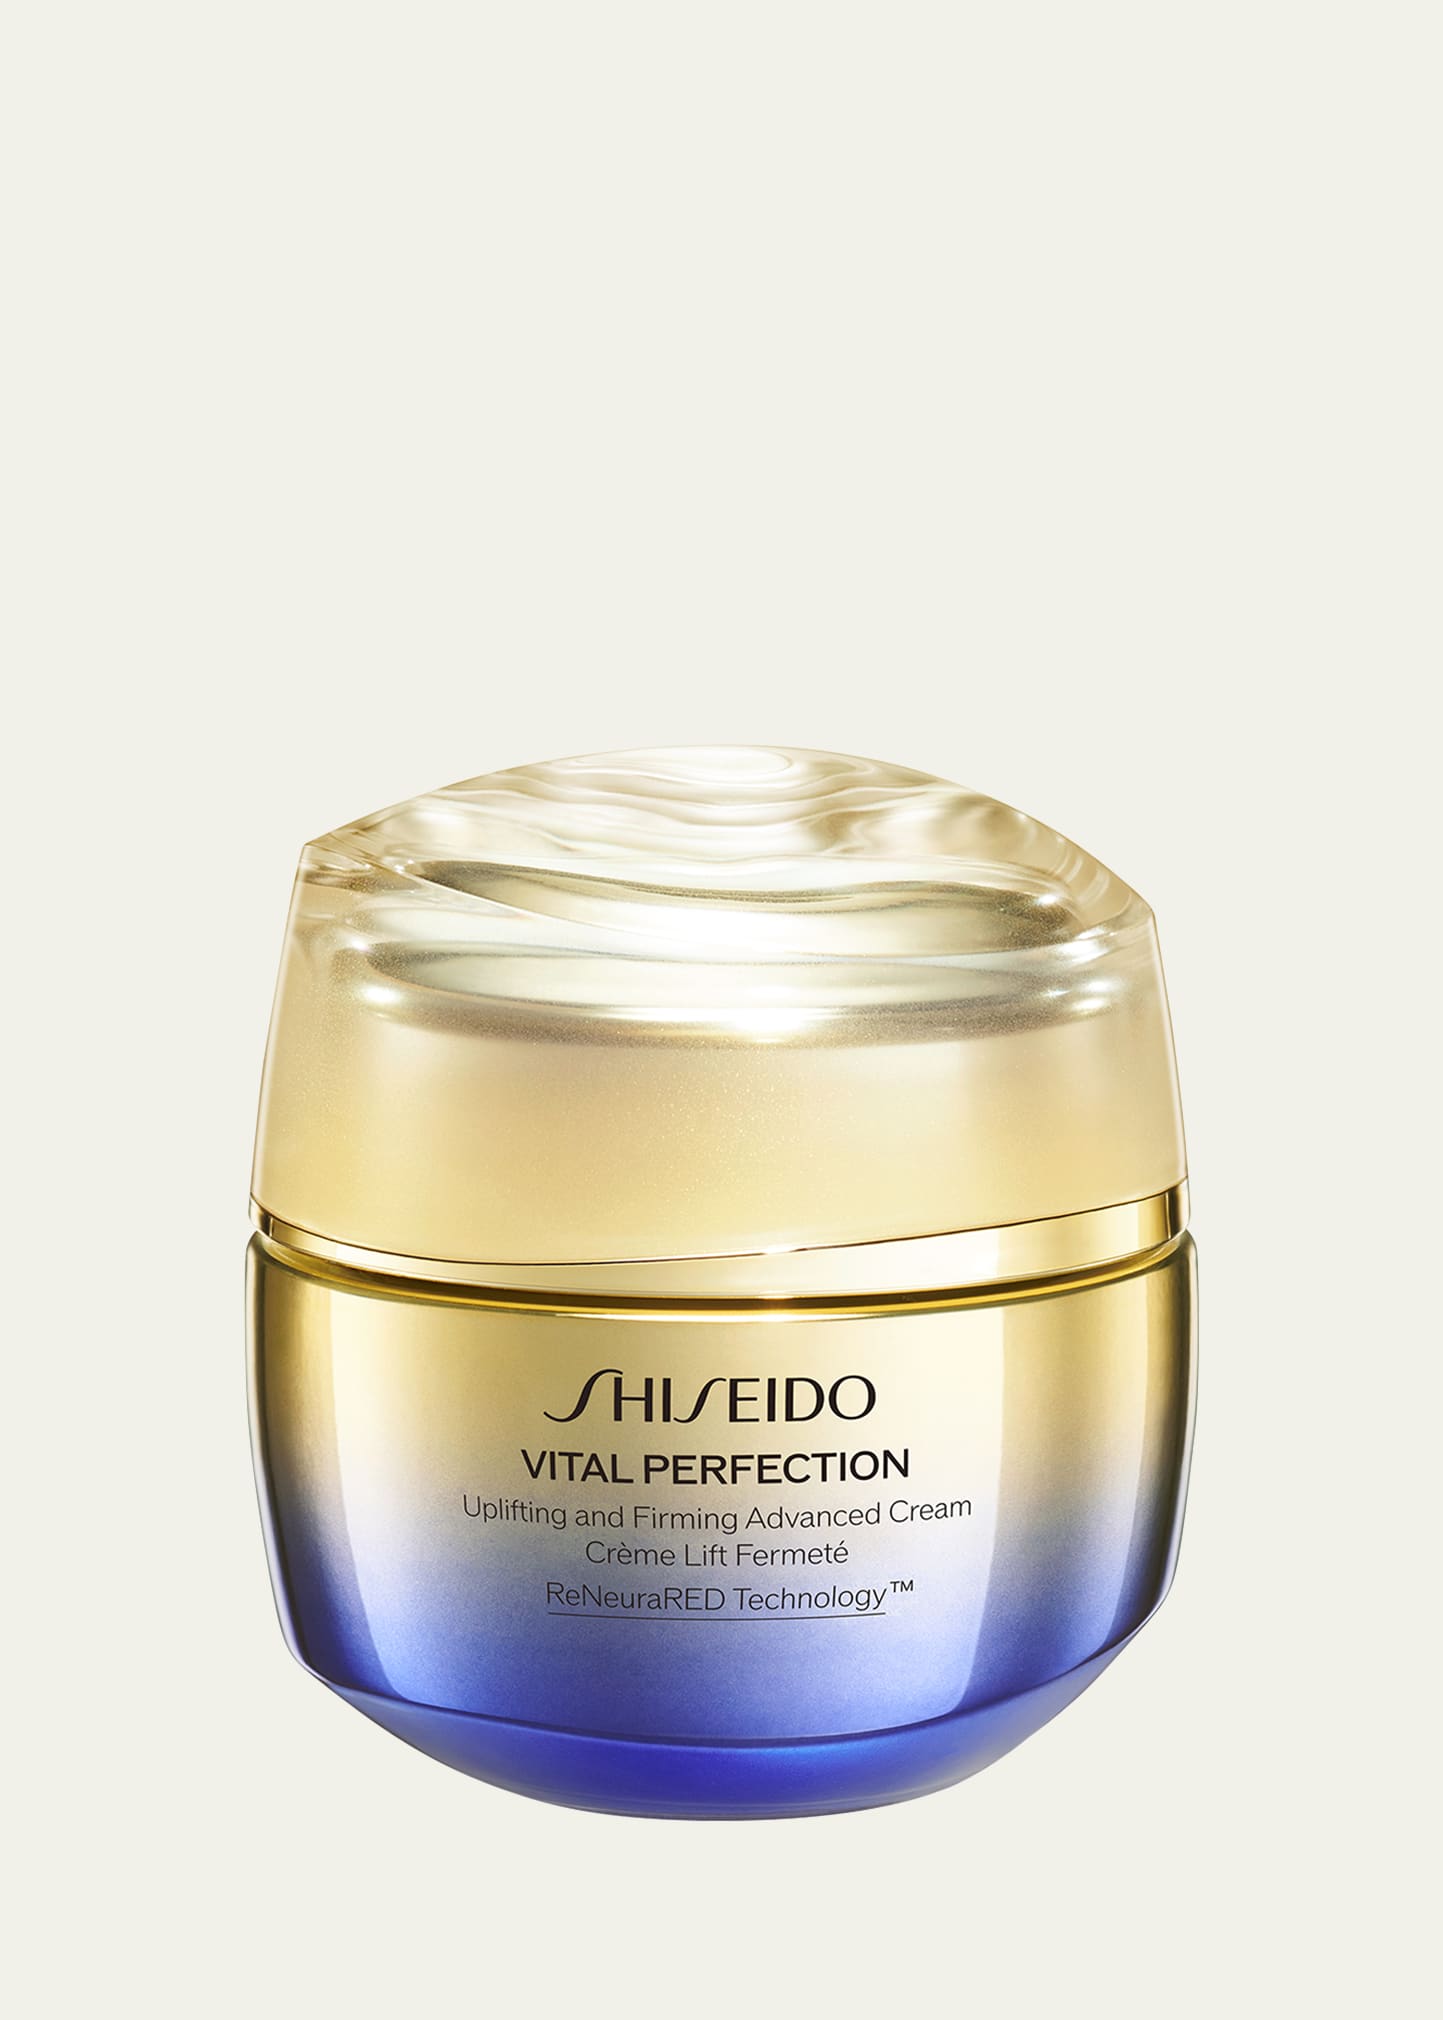 Shiseido Vital Perfection Uplifting And Firming Advanced Cream, 1.7 Oz. In White